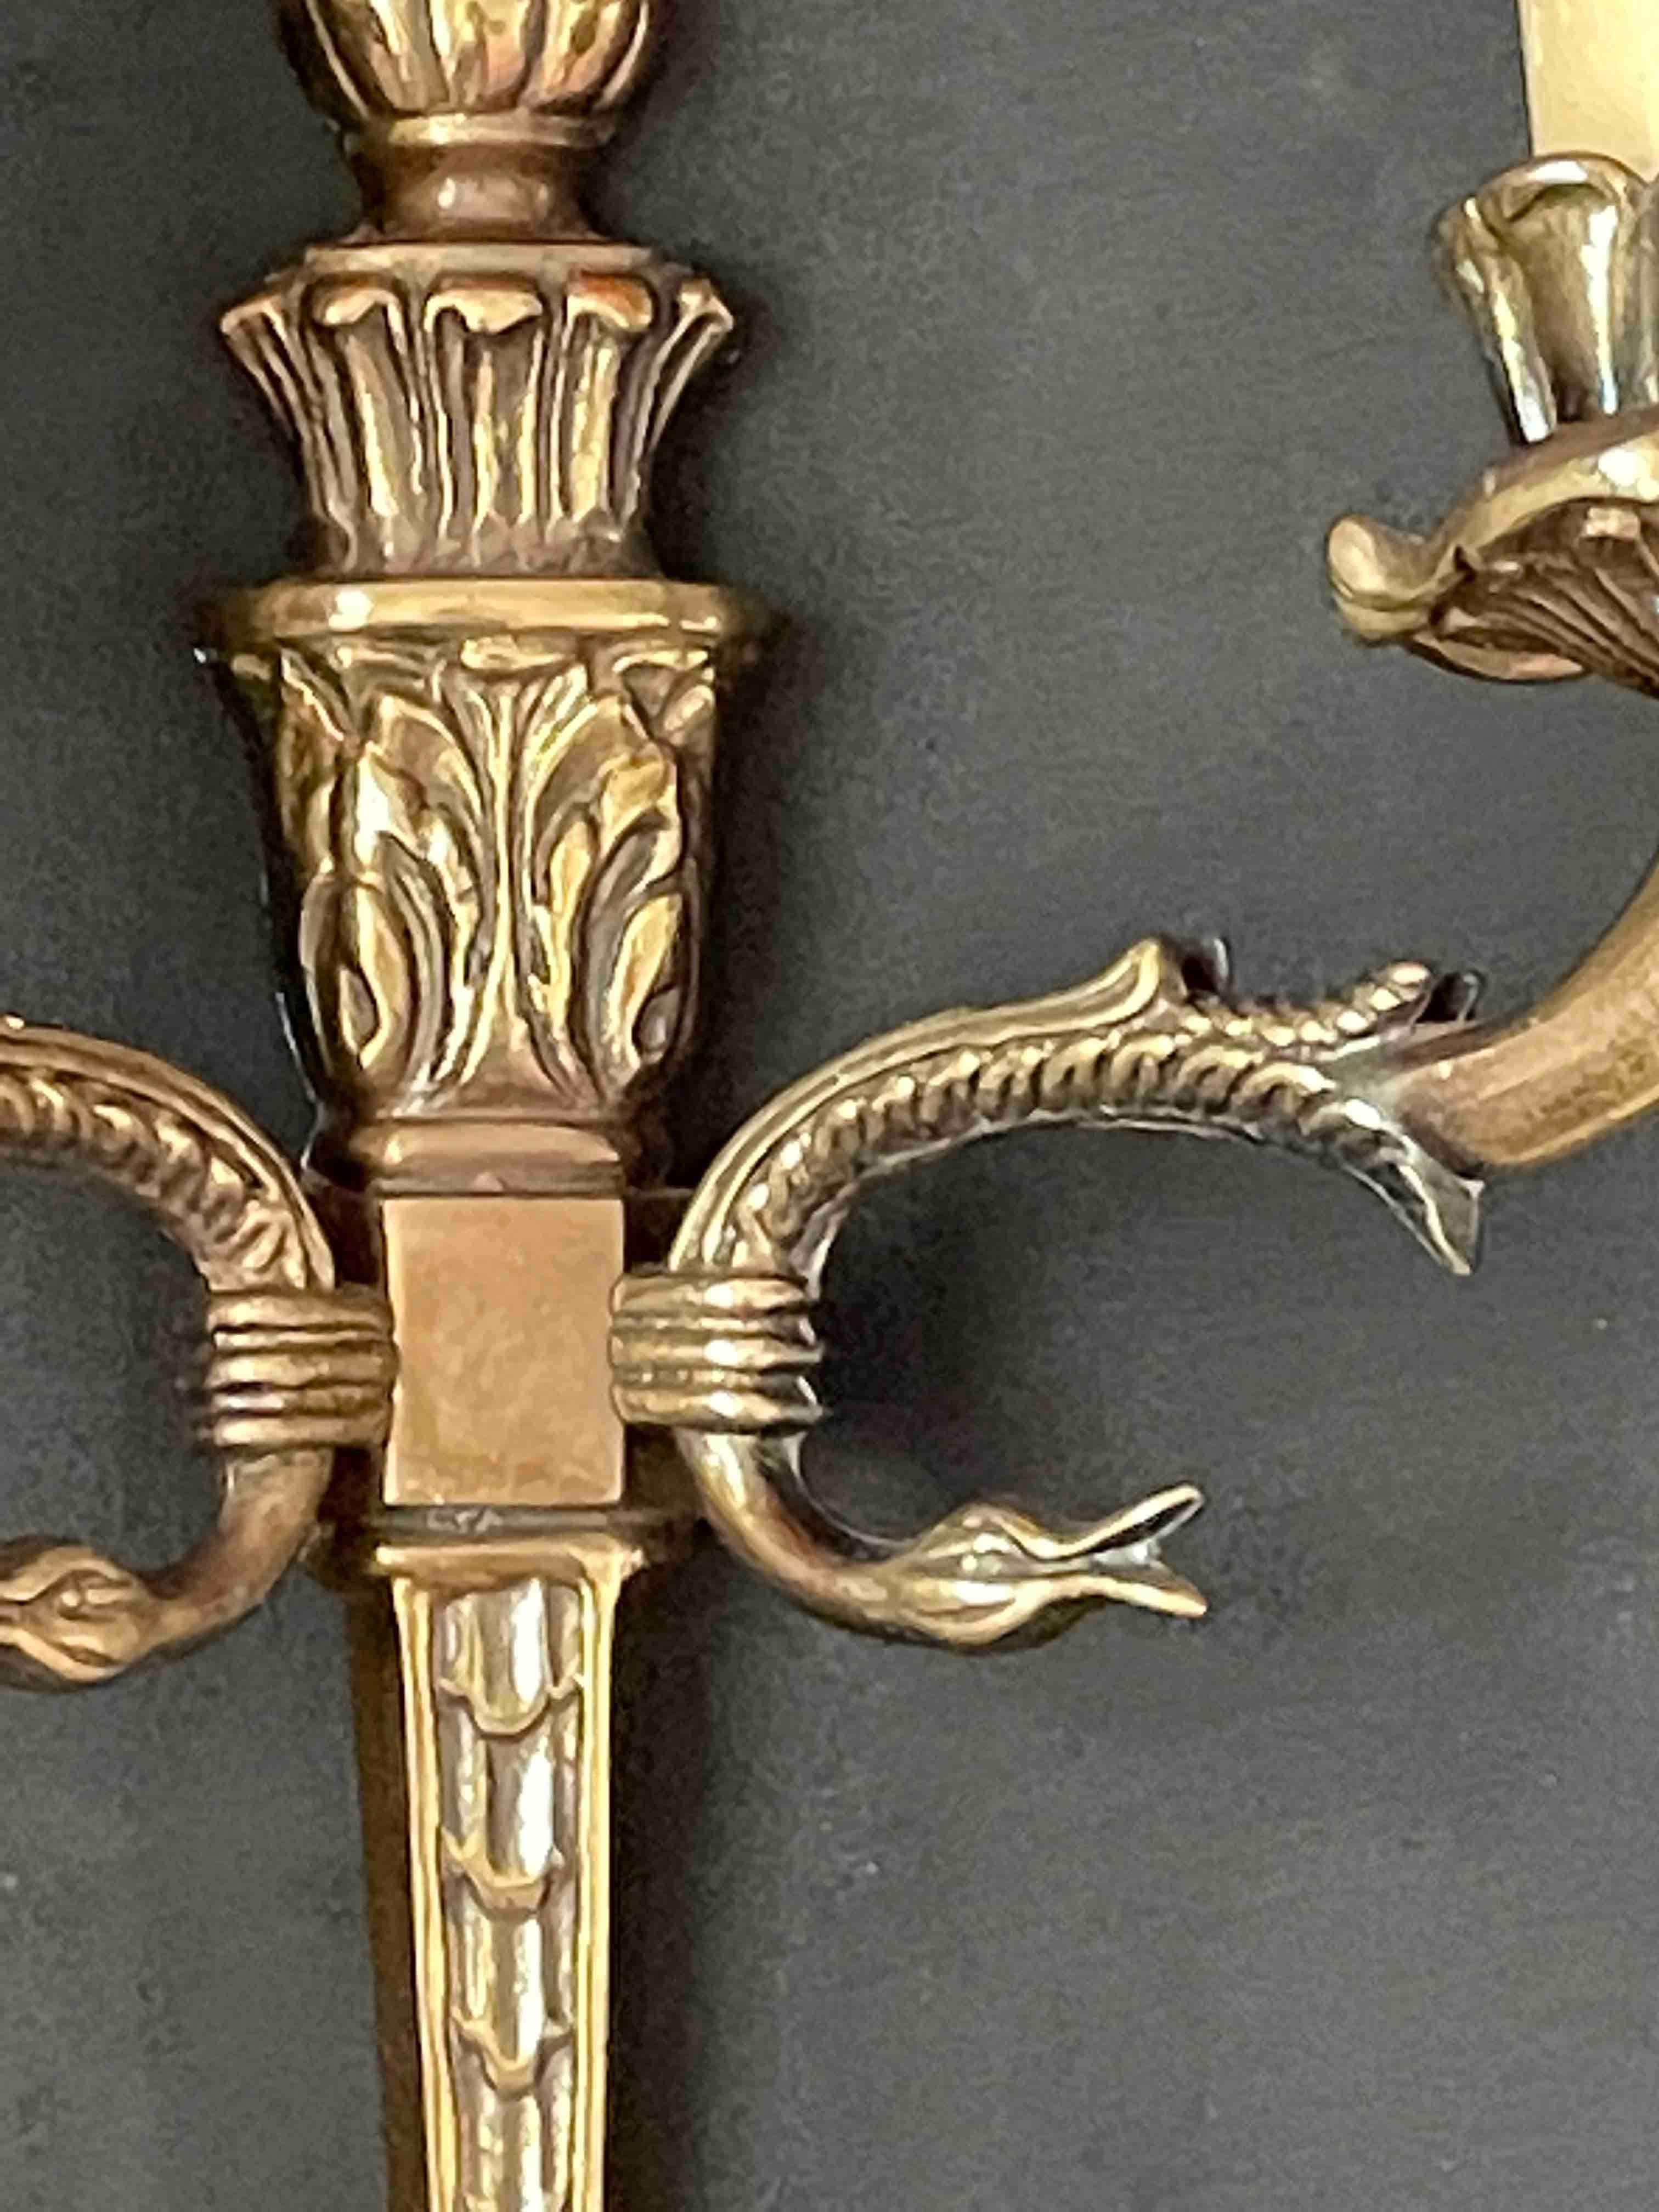 Pair of Empire Wall Sconces in Bronze with Swan Goose Motif Arms, Italy, 1950s For Sale 6